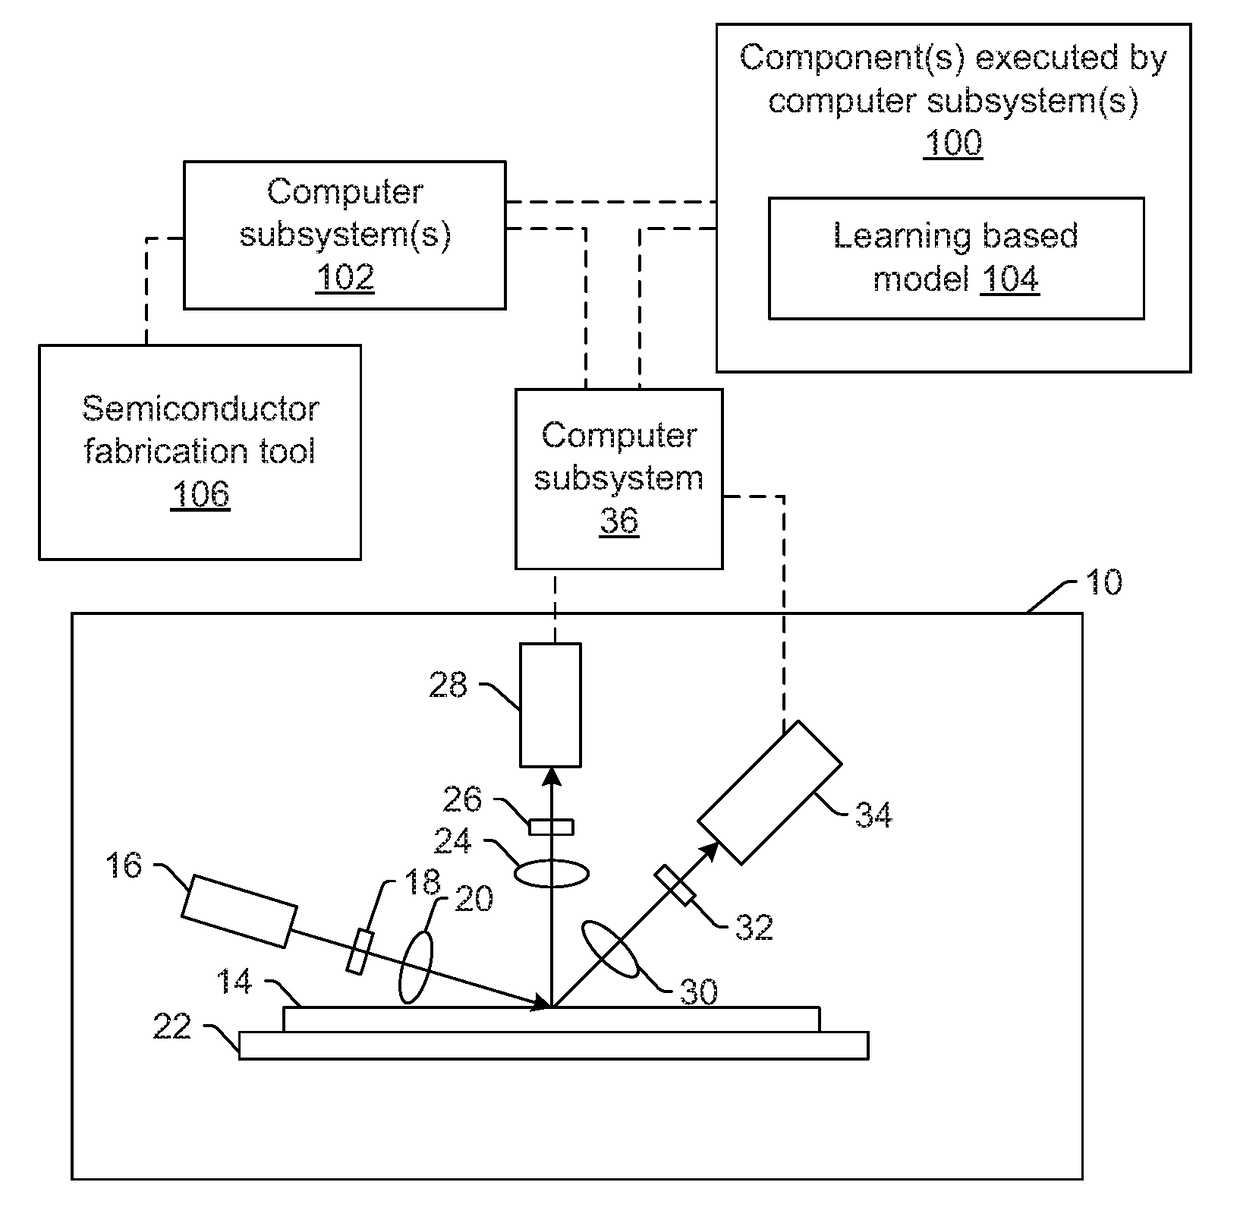 Accelerating semiconductor-related computations using learning based models